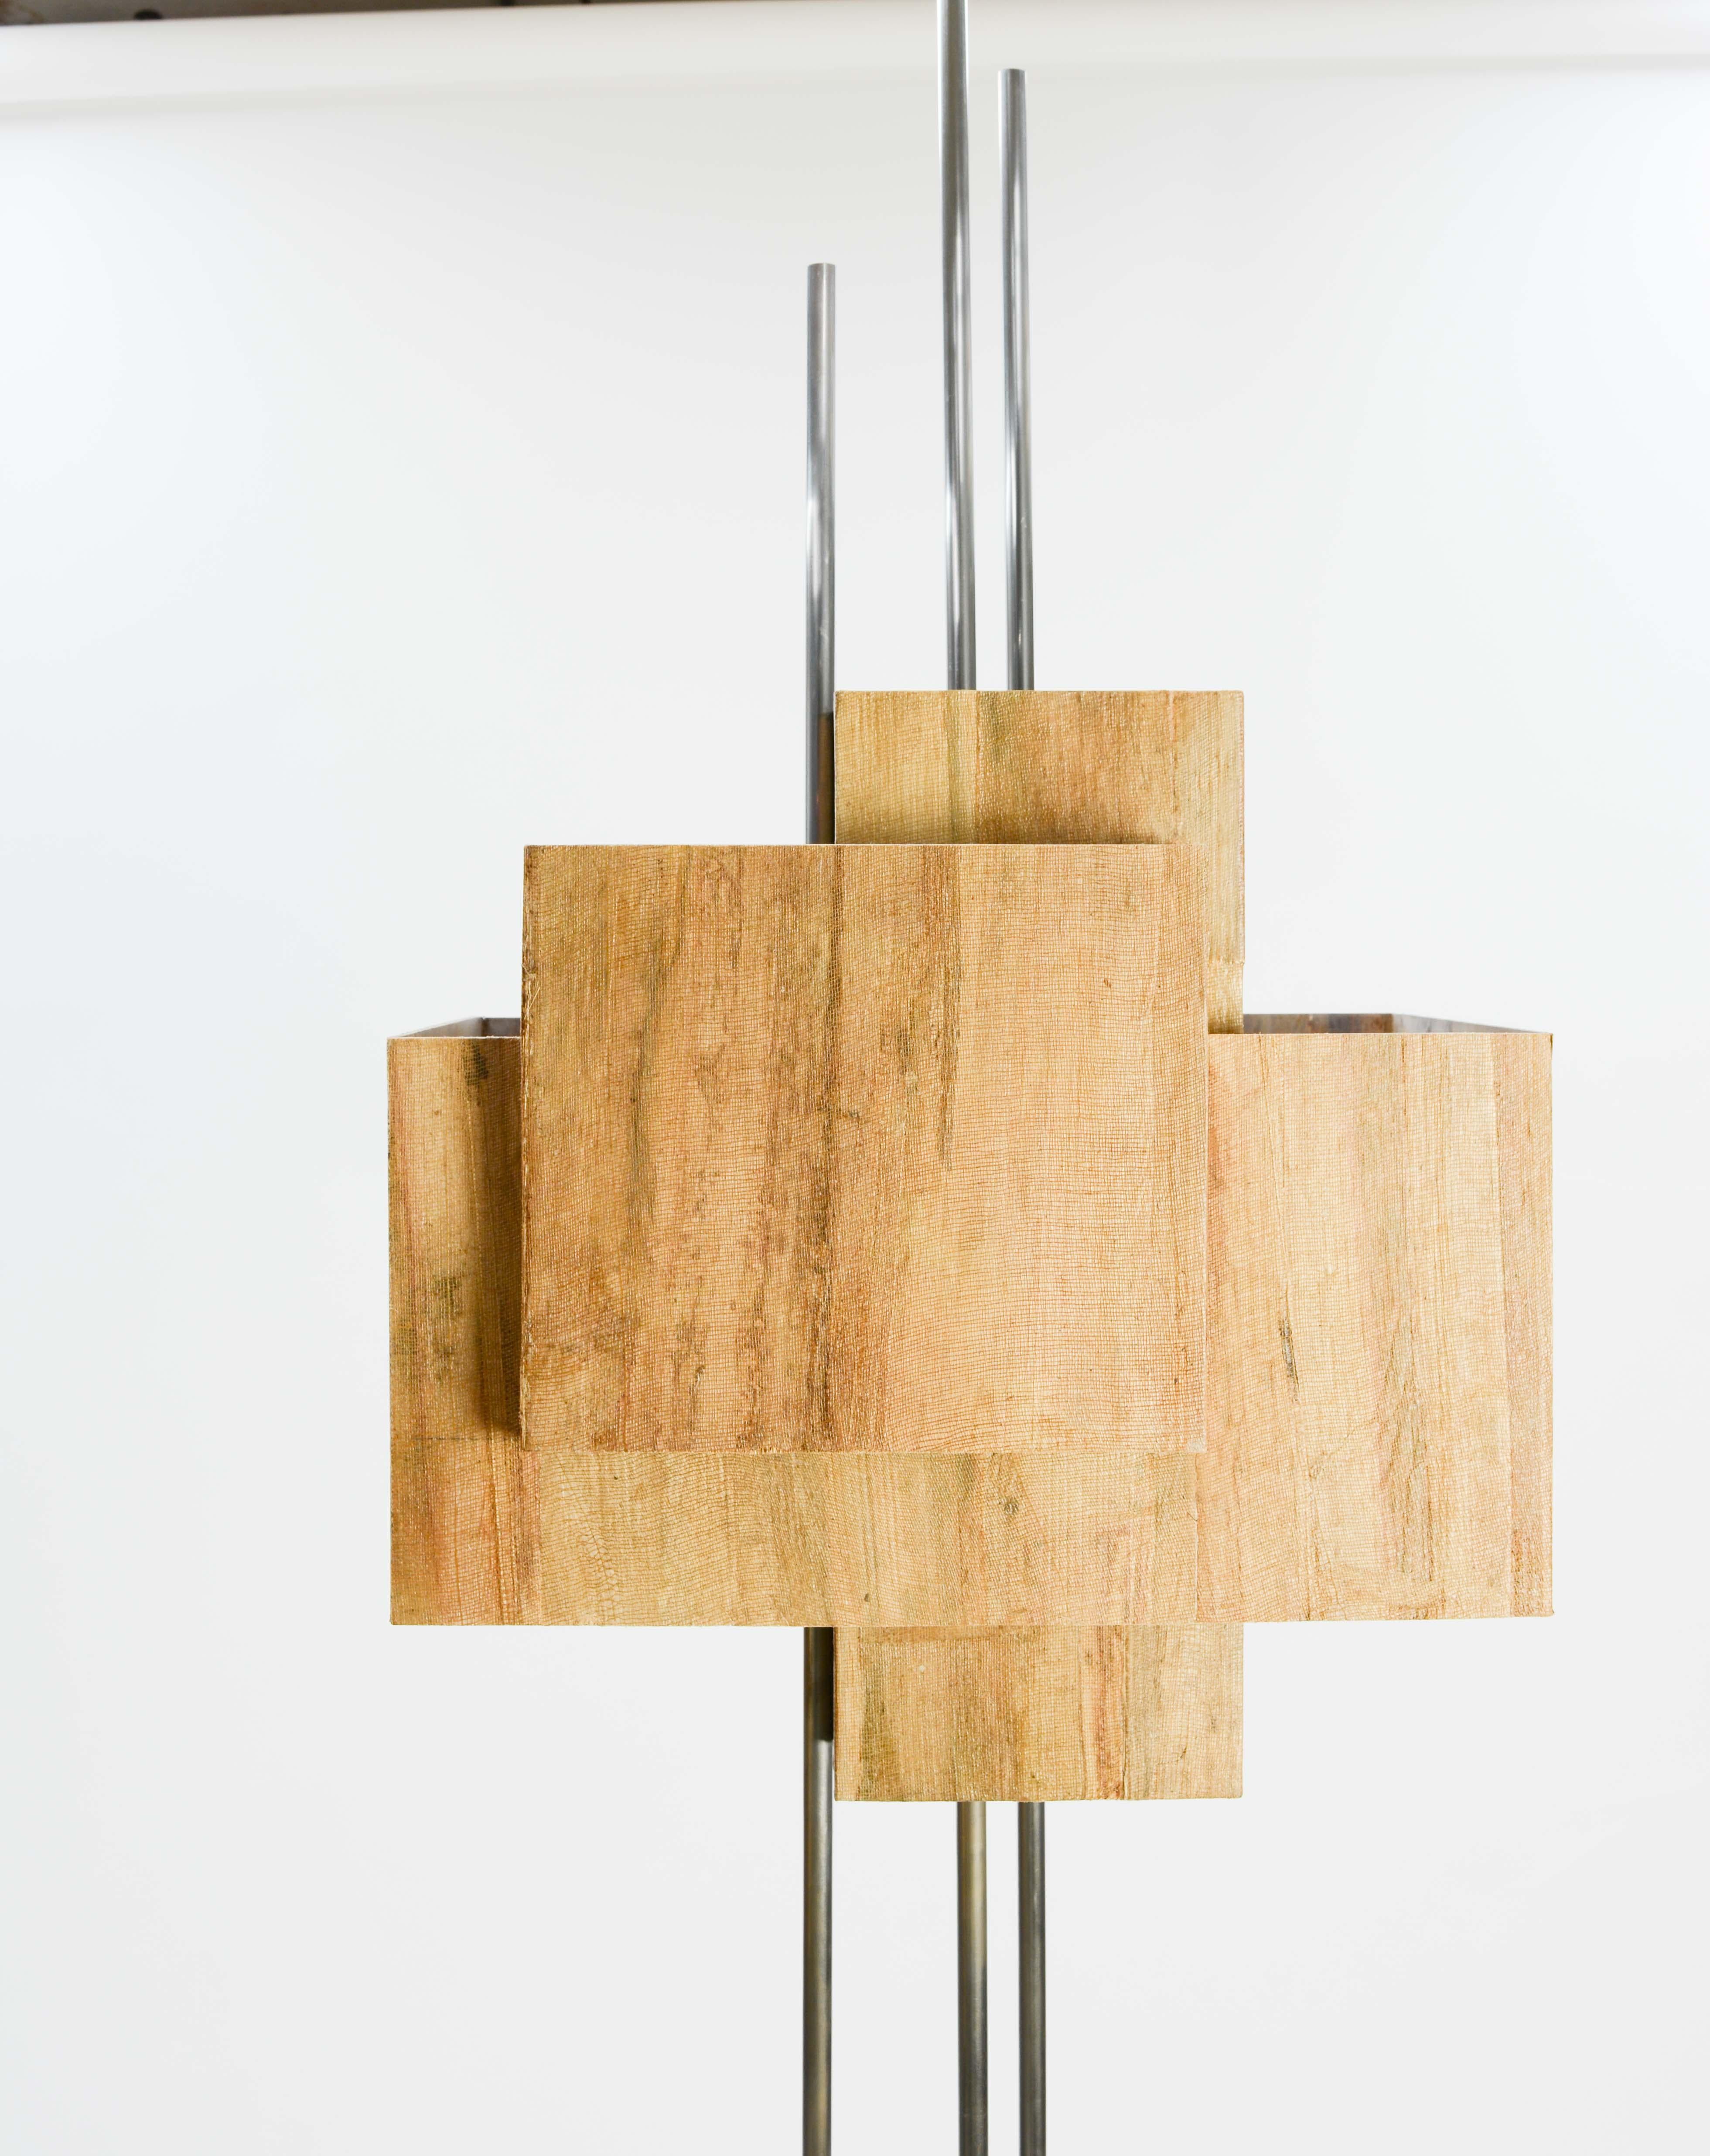 Frank Lloyd Wright Inspired Floor Lamp by Lighting Artisan Jamie Voilette In Excellent Condition For Sale In Portland, OR